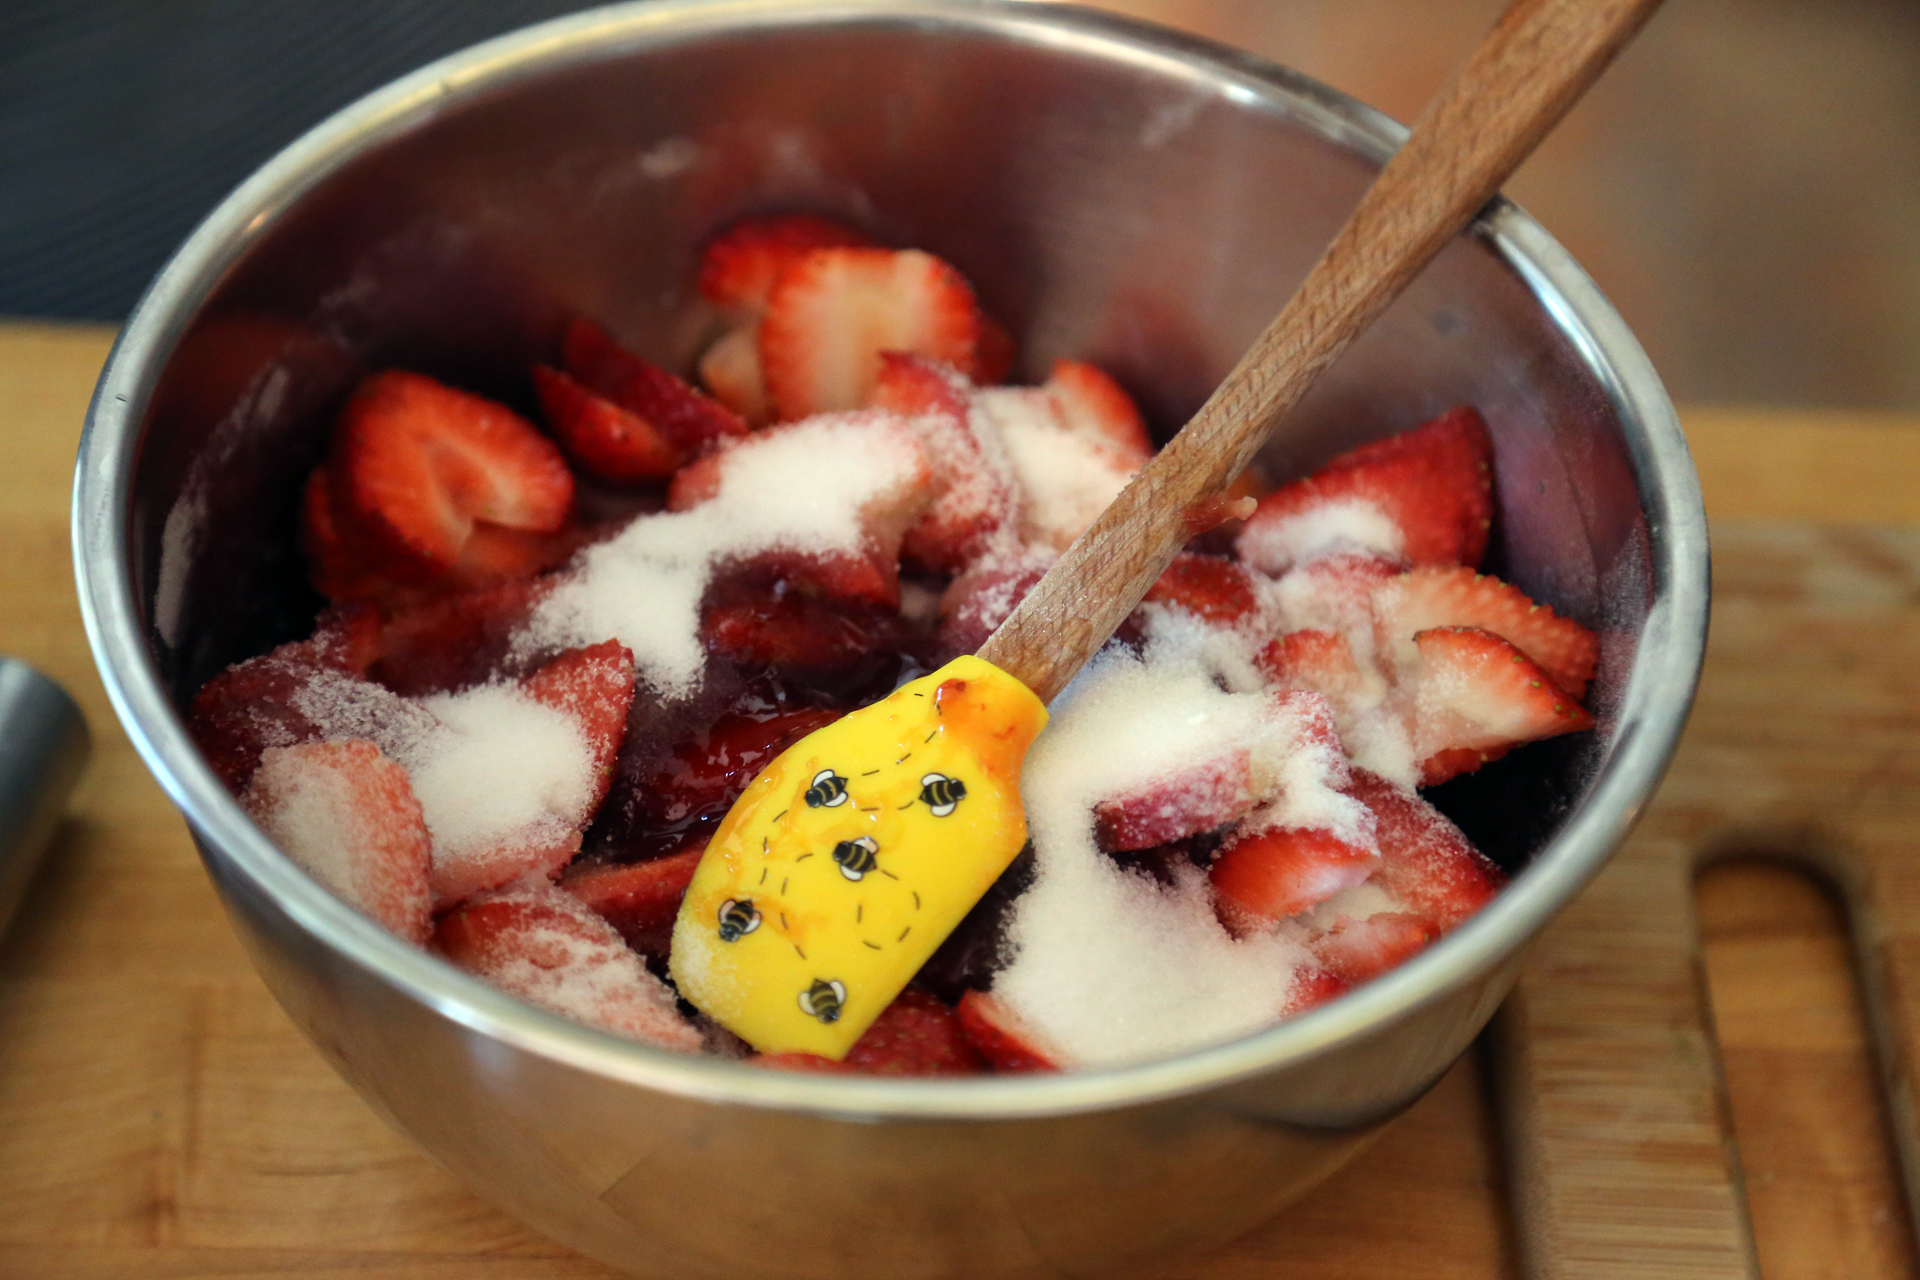 To prepare the strawberries, toss together the strawberries, sugar, jam, lemon juice, and flour.